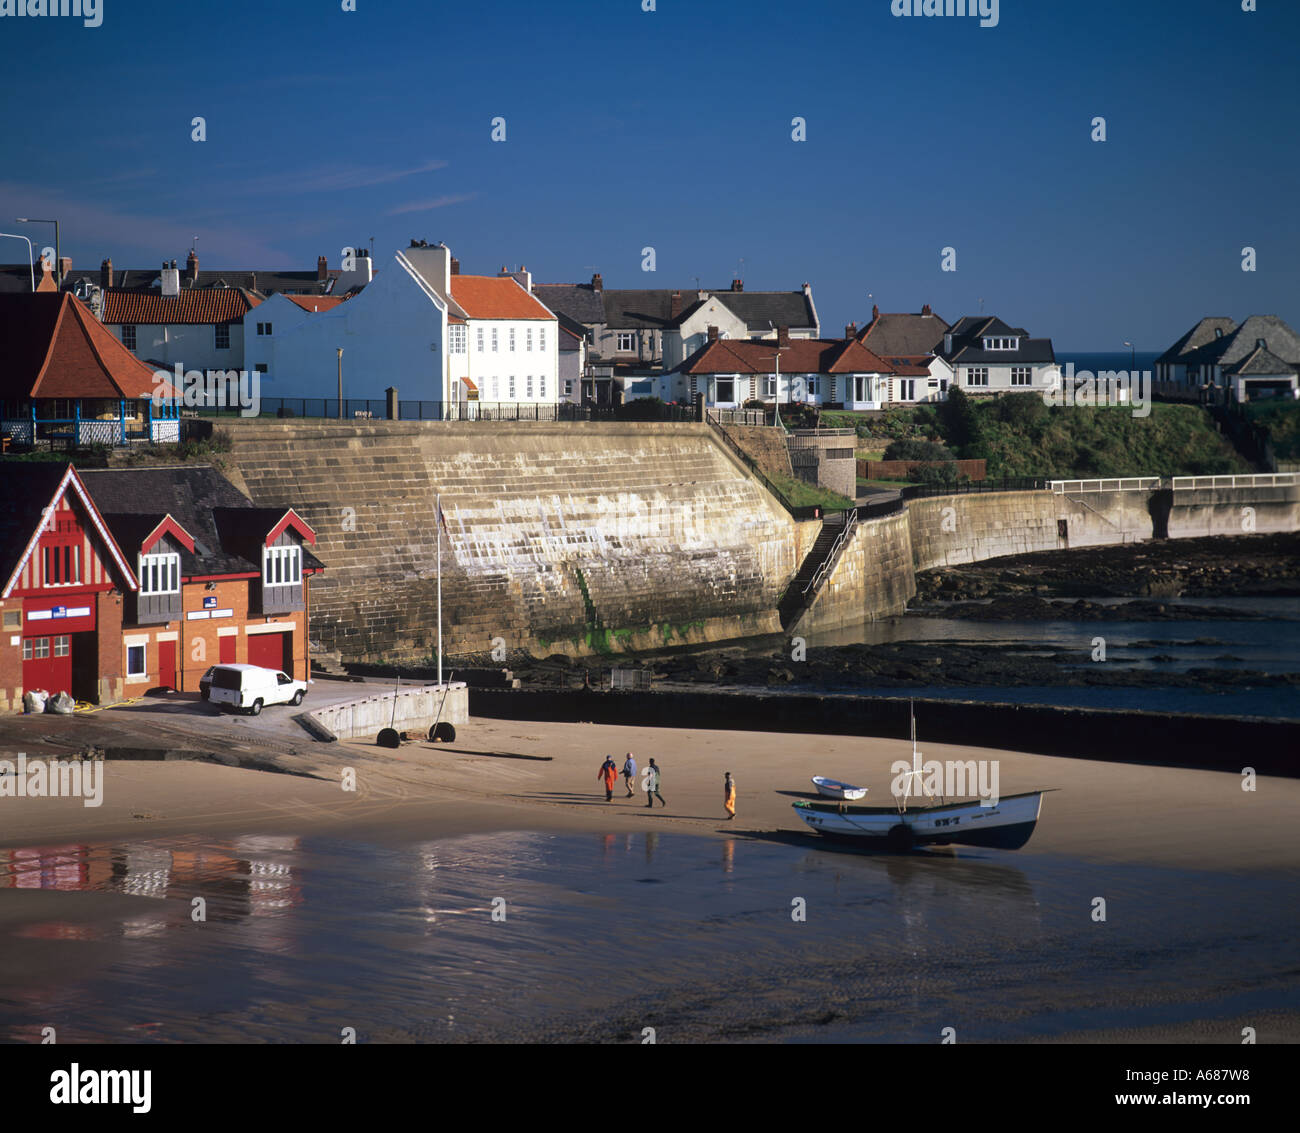 Fishermen launch traditional coble near the Old Lifeboat Station Cullercoats Tyne and Wear England UK Stock Photo